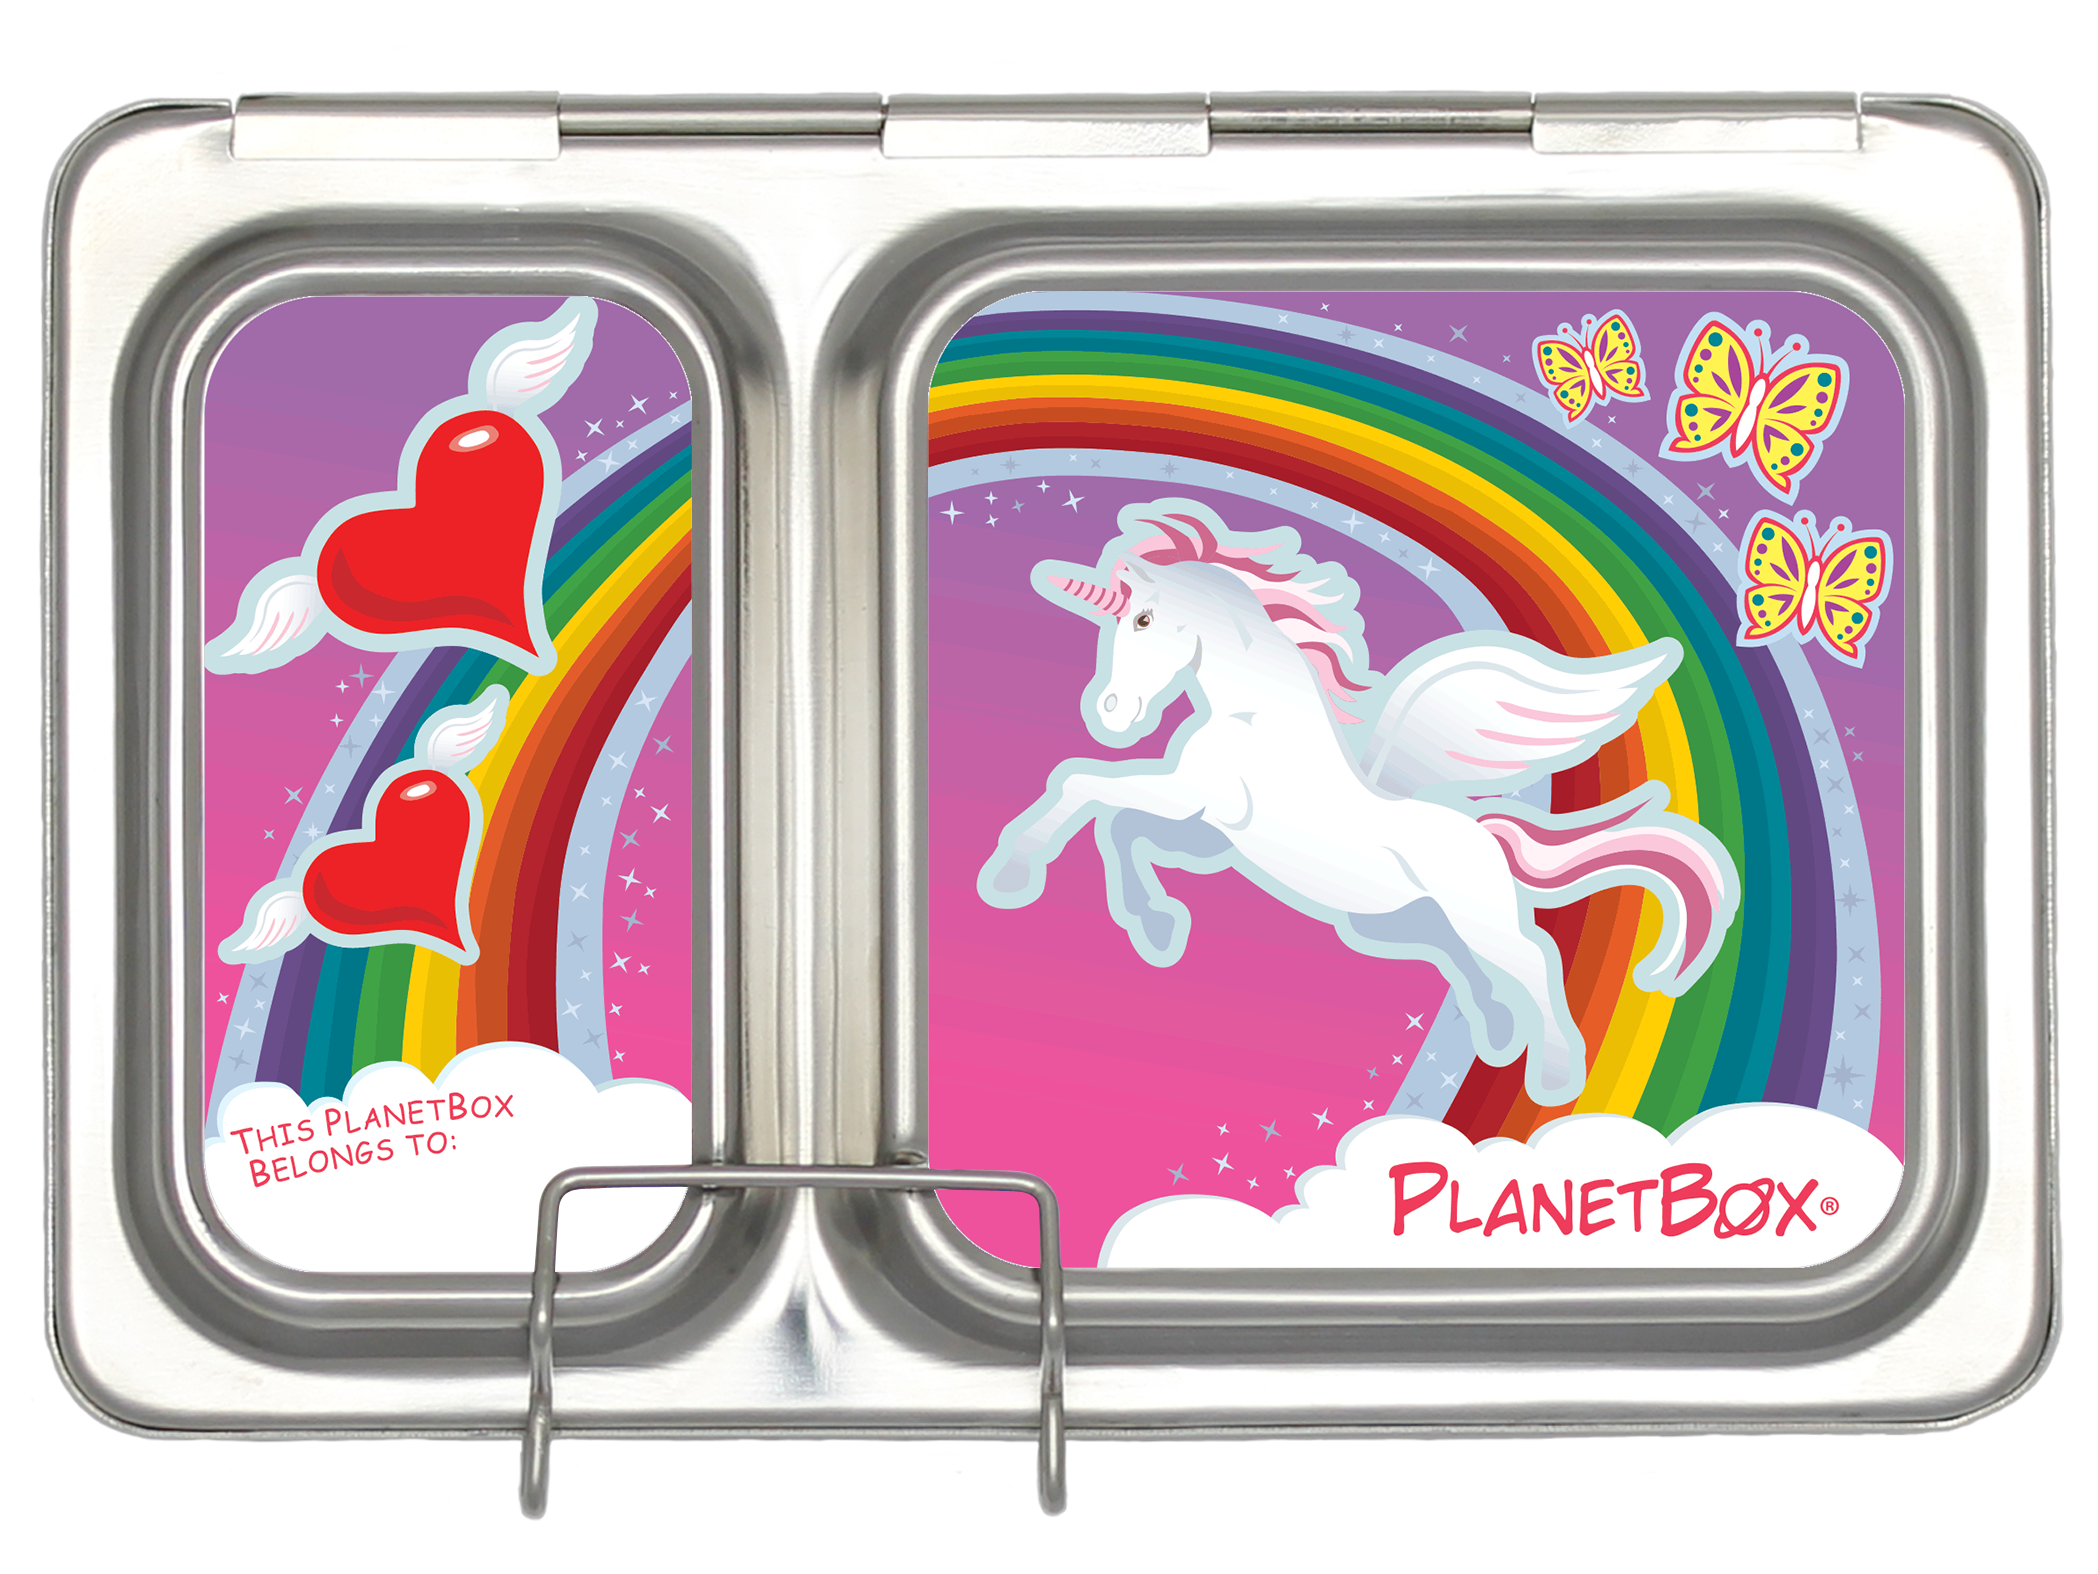 Planetbox Rover Lunch Boxes Kit DREAMER (Box, Containers, Magnets)